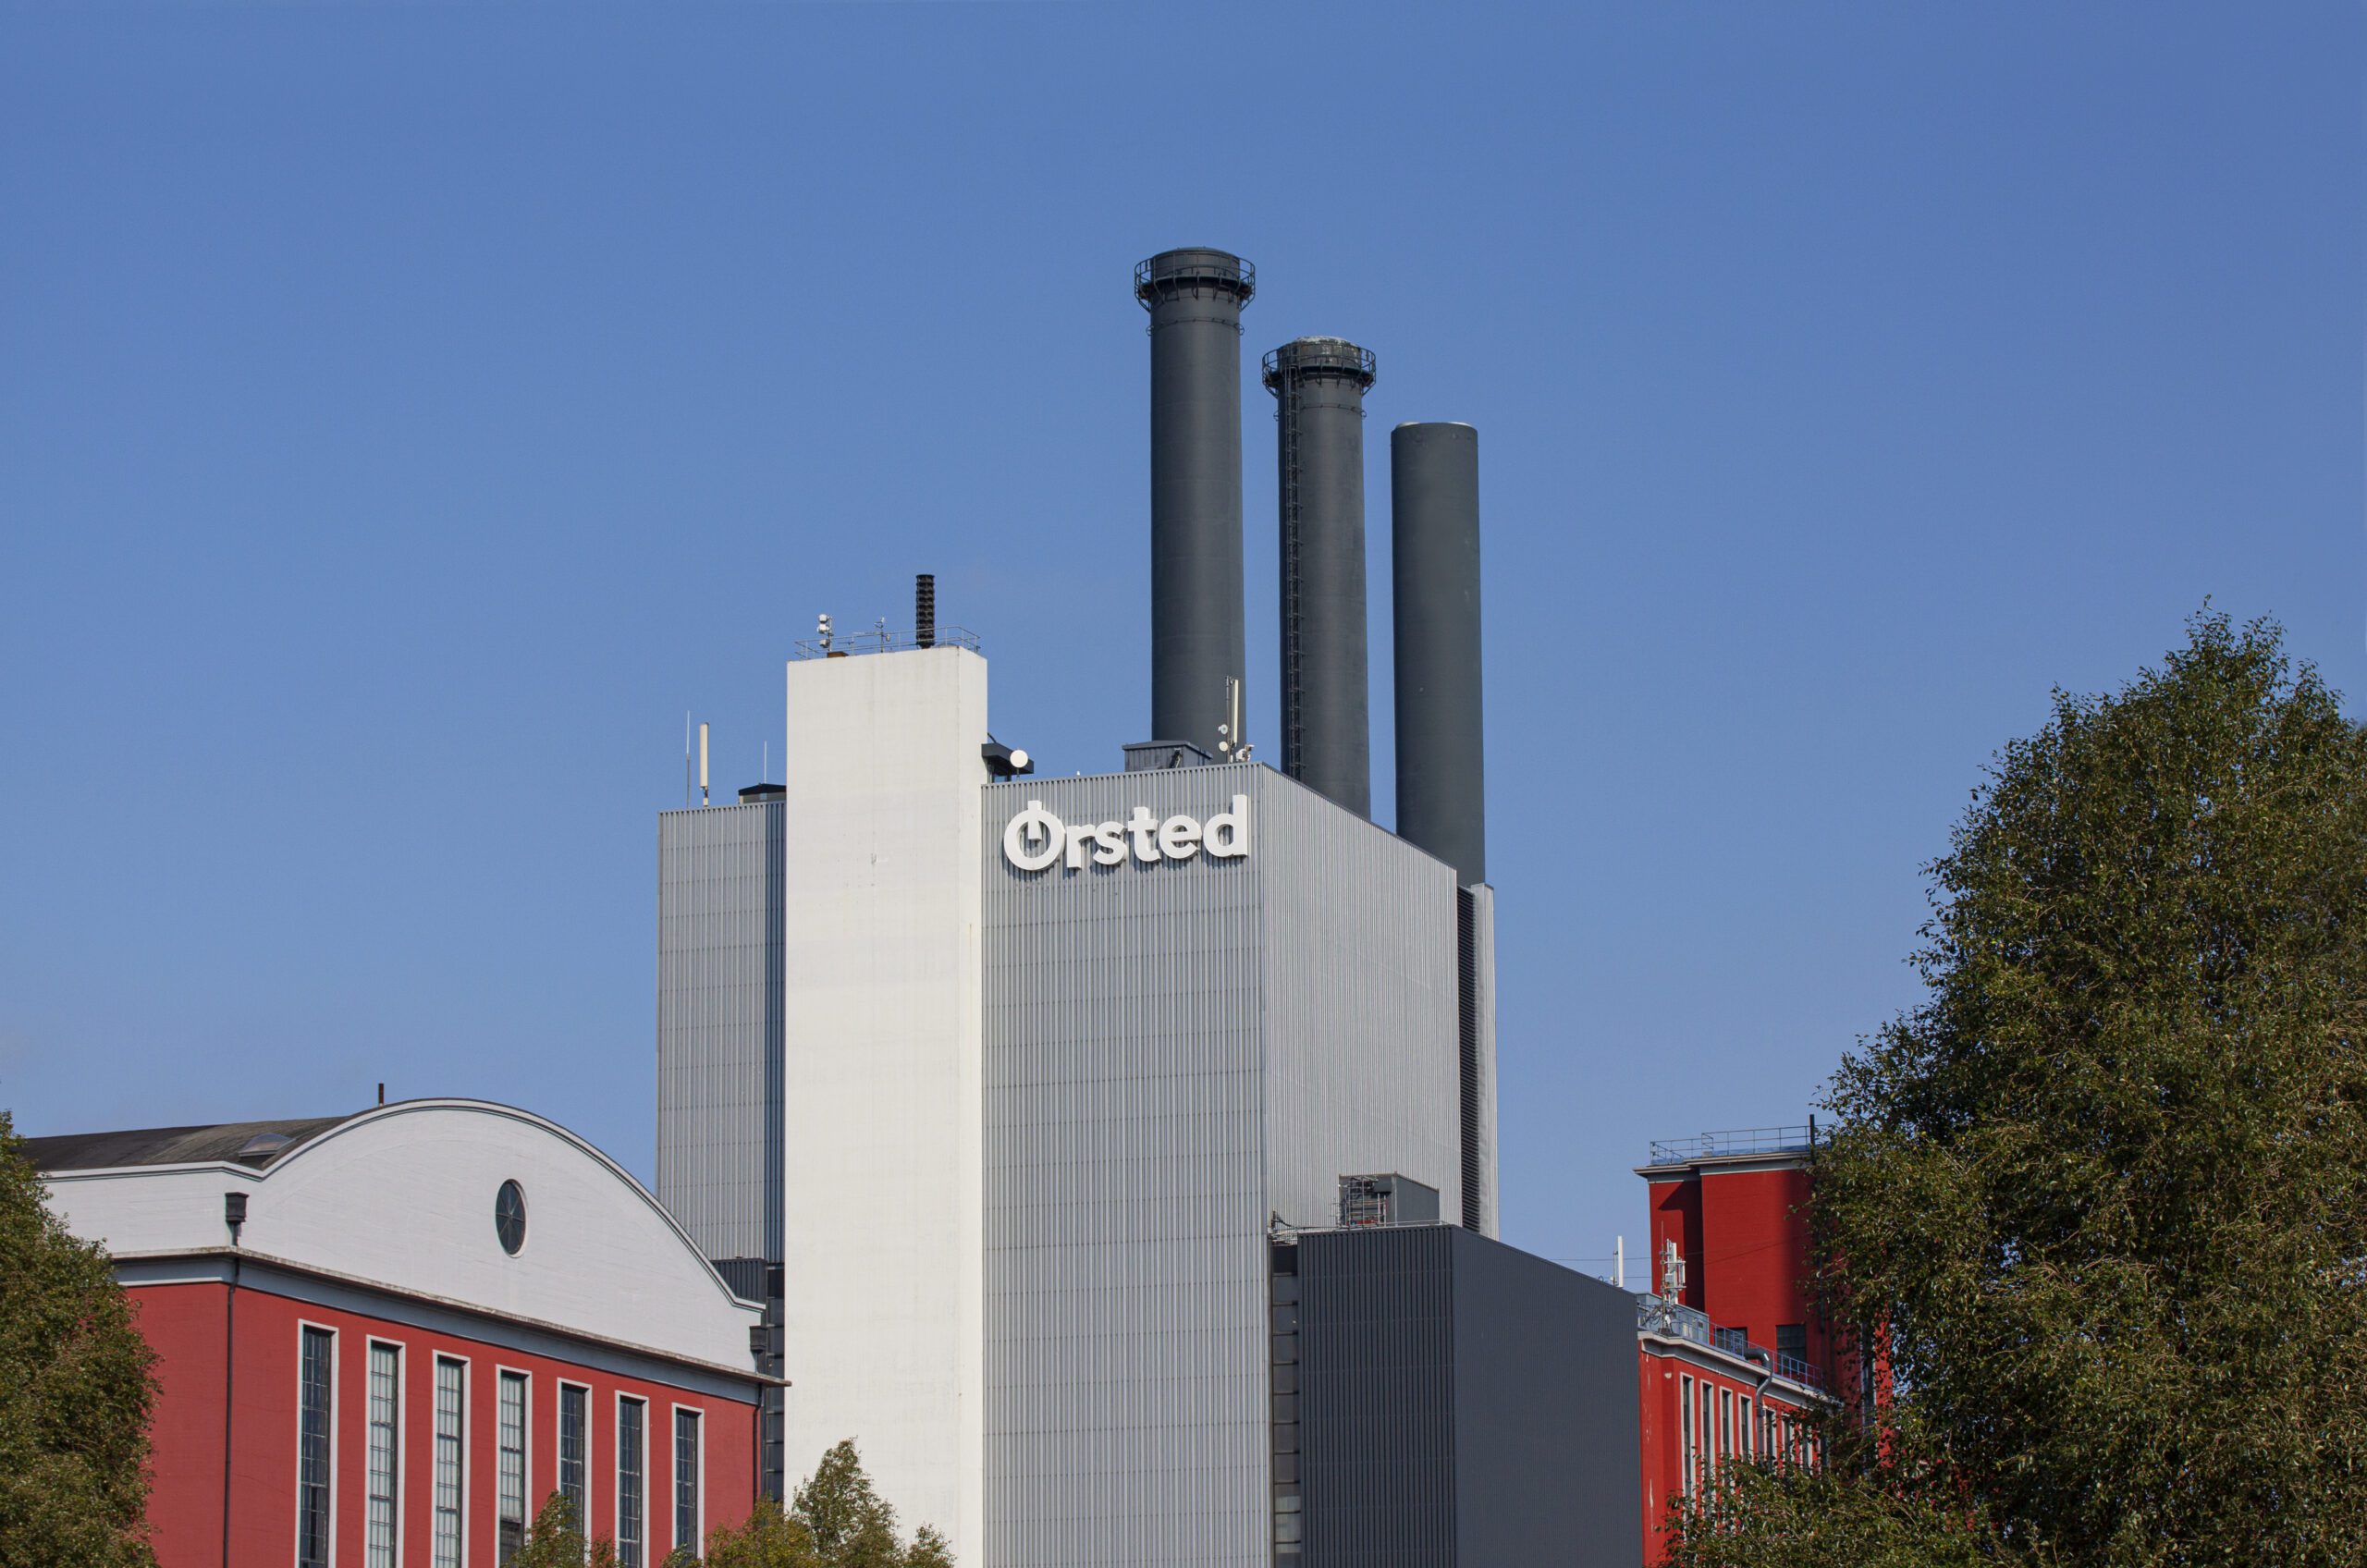 Ørsted Orsted Oersted logotype on building. Danish renewable company power plant factory producing electricity and energy from wind turbines. Copenhagen, Denmark - September 16, 2020